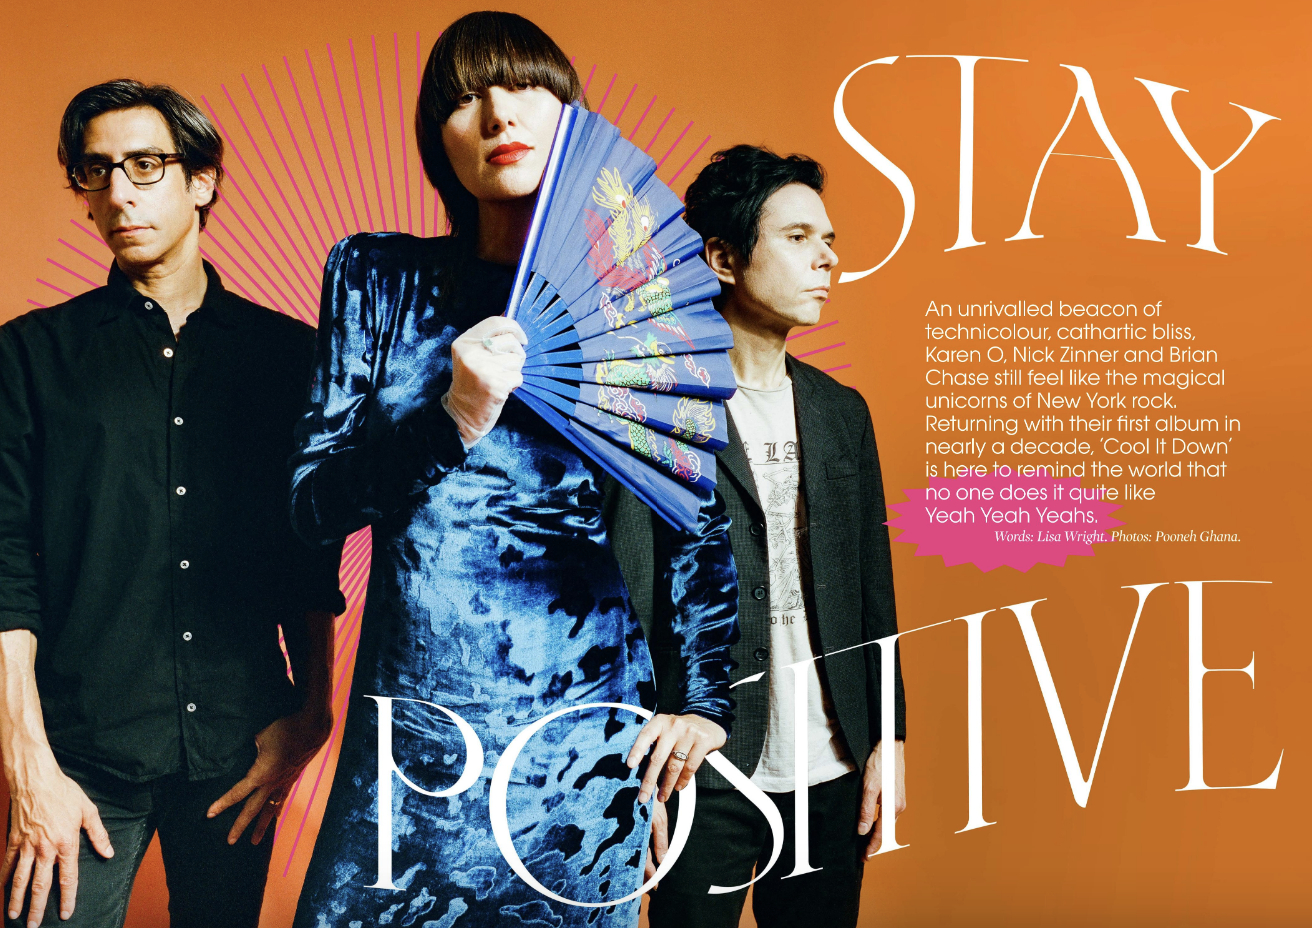 CoqCreative power by ProductionLink s.r.l. DIY-Magazine-Yeah-Yeah-Yeahs-Stay-Positive DIY-Magazine-Yeah-Yeah-Yeahs-Stay-Positive  DIY-Magazine-Yeah-Yeah-Yeahs-Stay-Positive